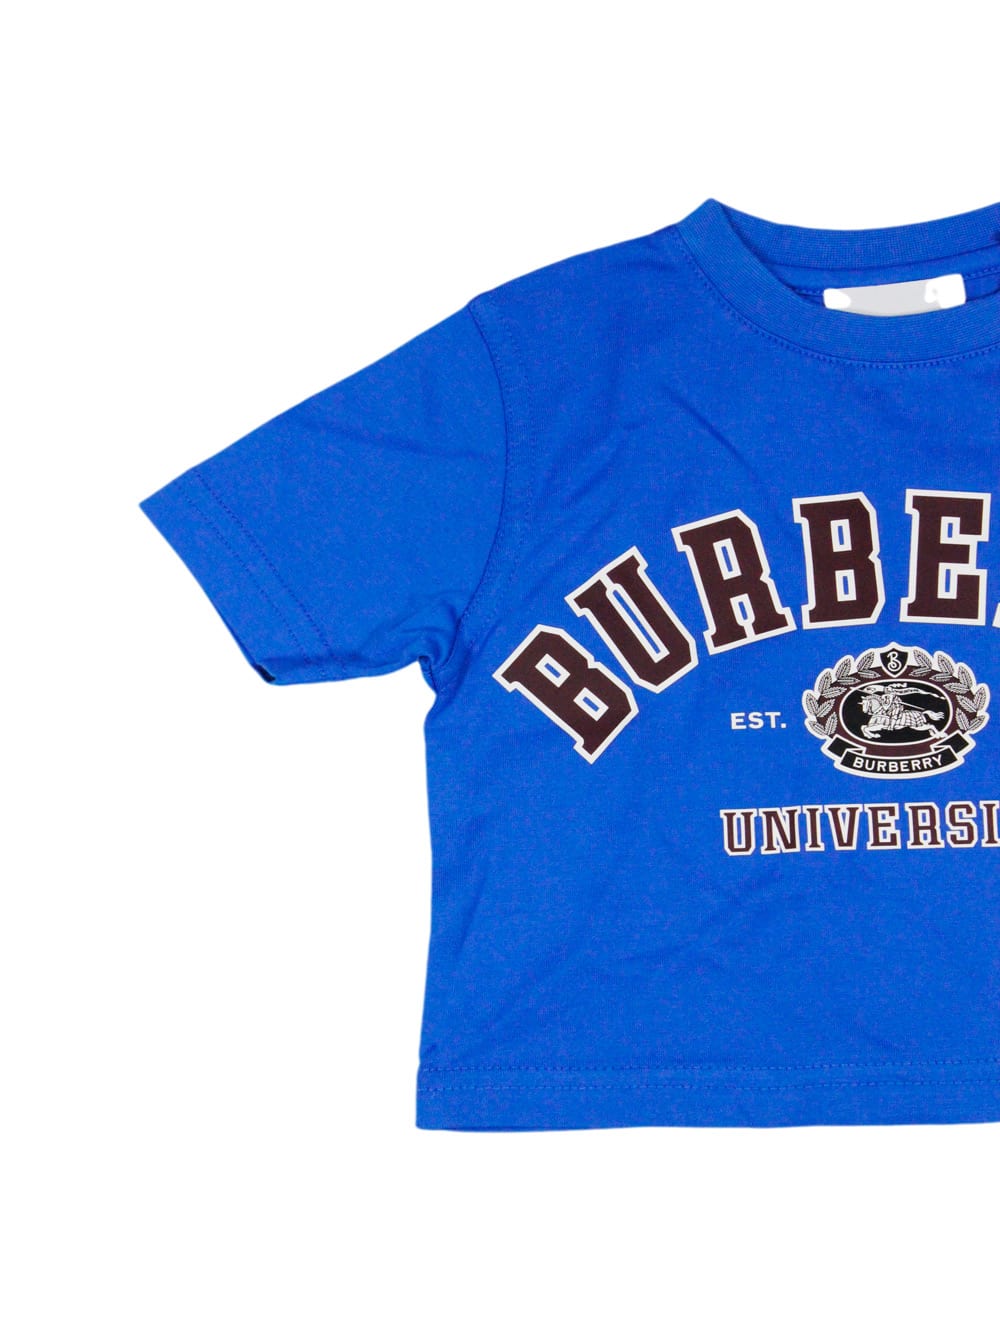 Shop Burberry Crew-neck T-shirt With Buttons On The Neck In Cotton Jersey With University Print In Blu